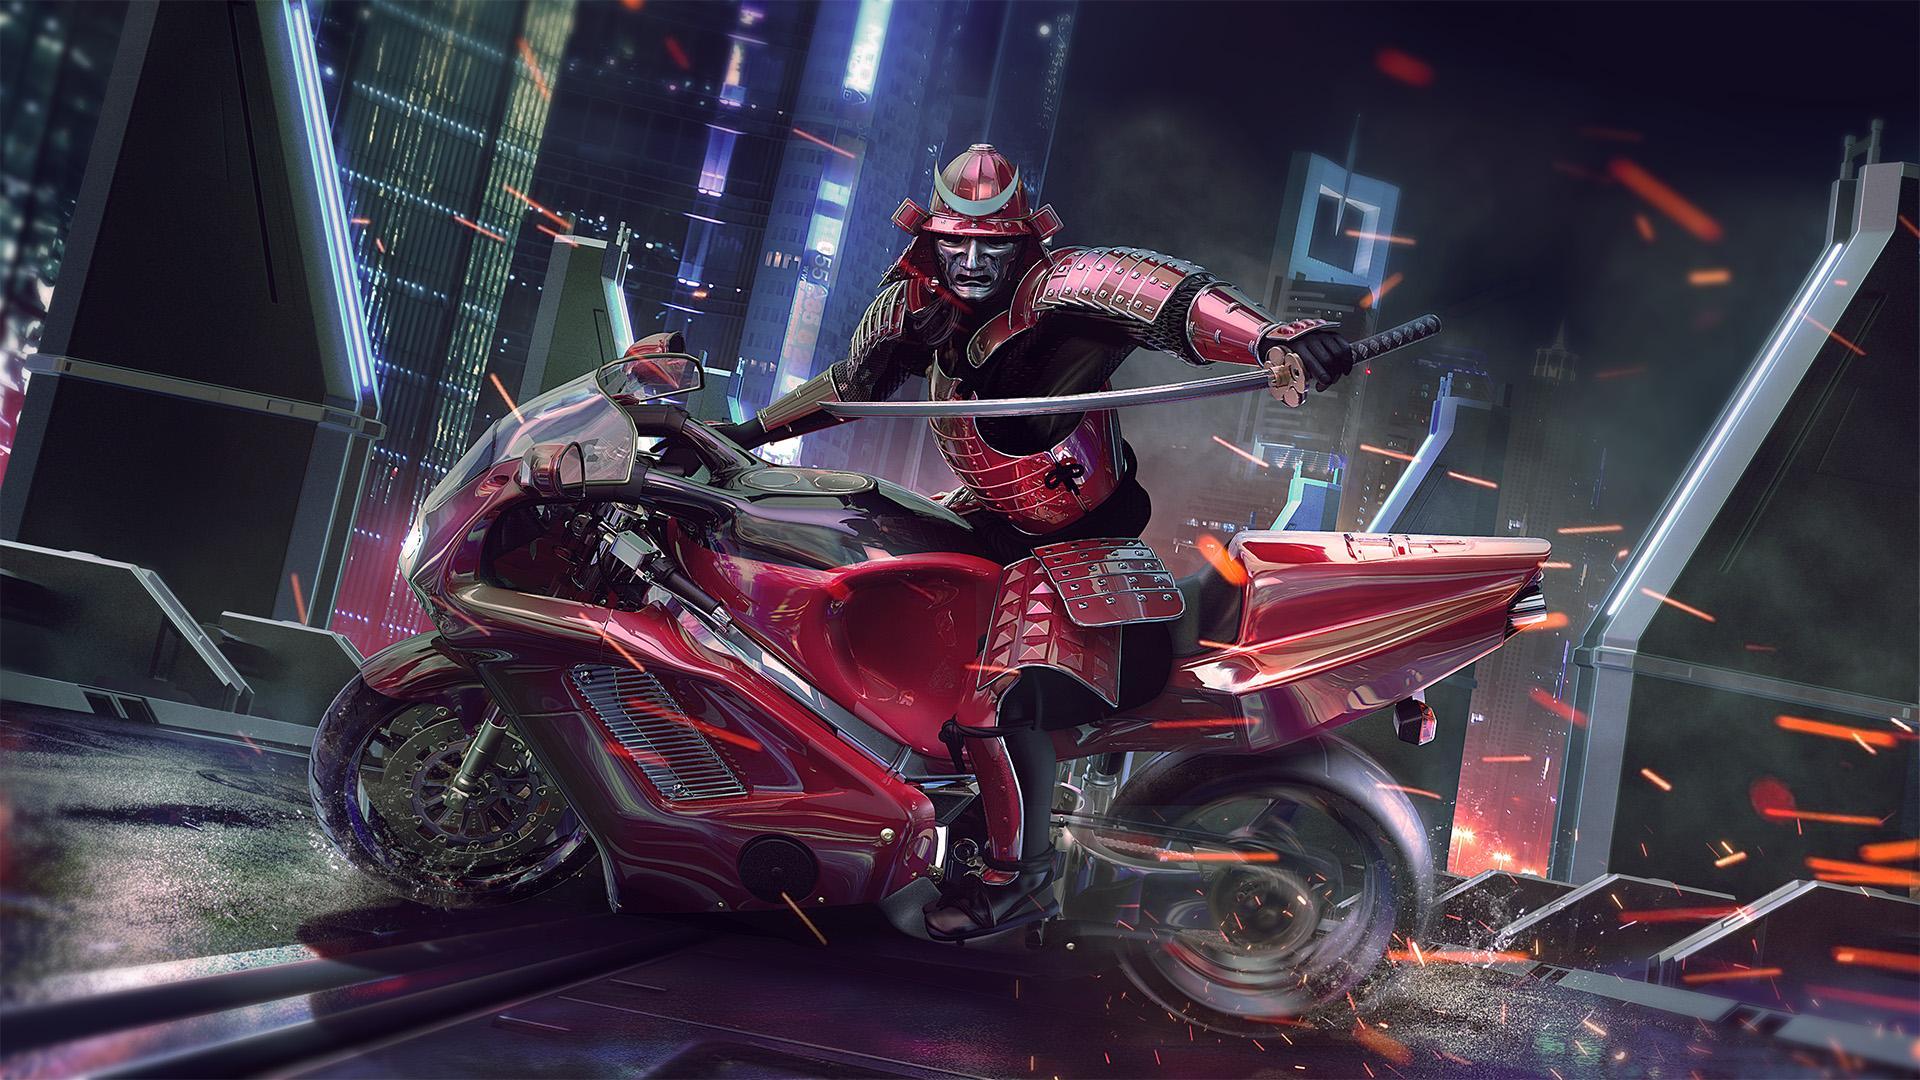 Cyberpunk Samurai own creation, super excited for this game